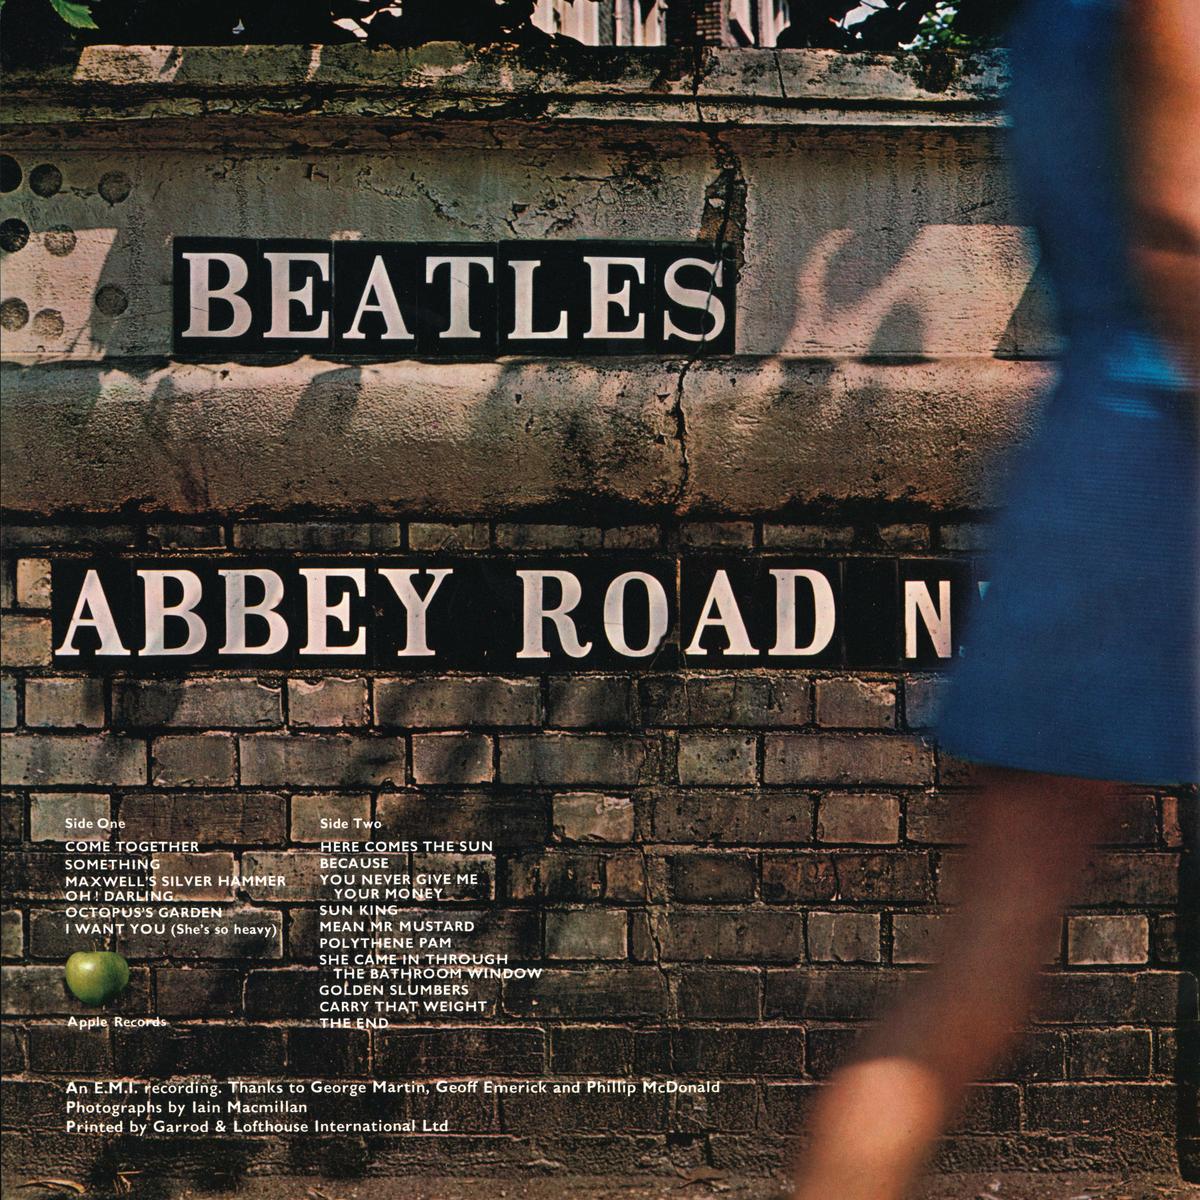 Abbey Road - The Beatles 